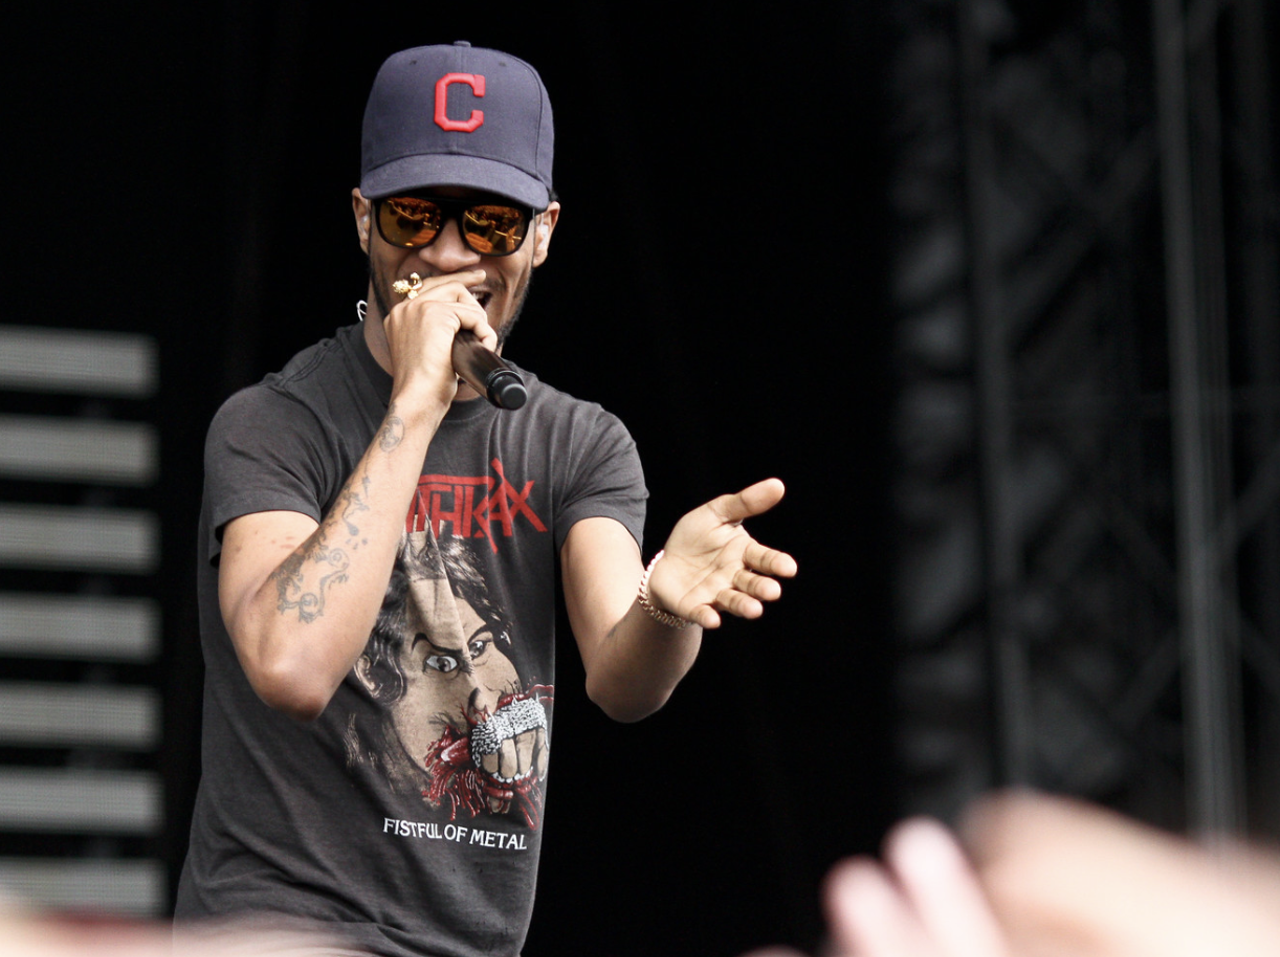 
Kid Cudi 
"I'll always root for the Cleveland Browns...That's how we do it in Cleveland."